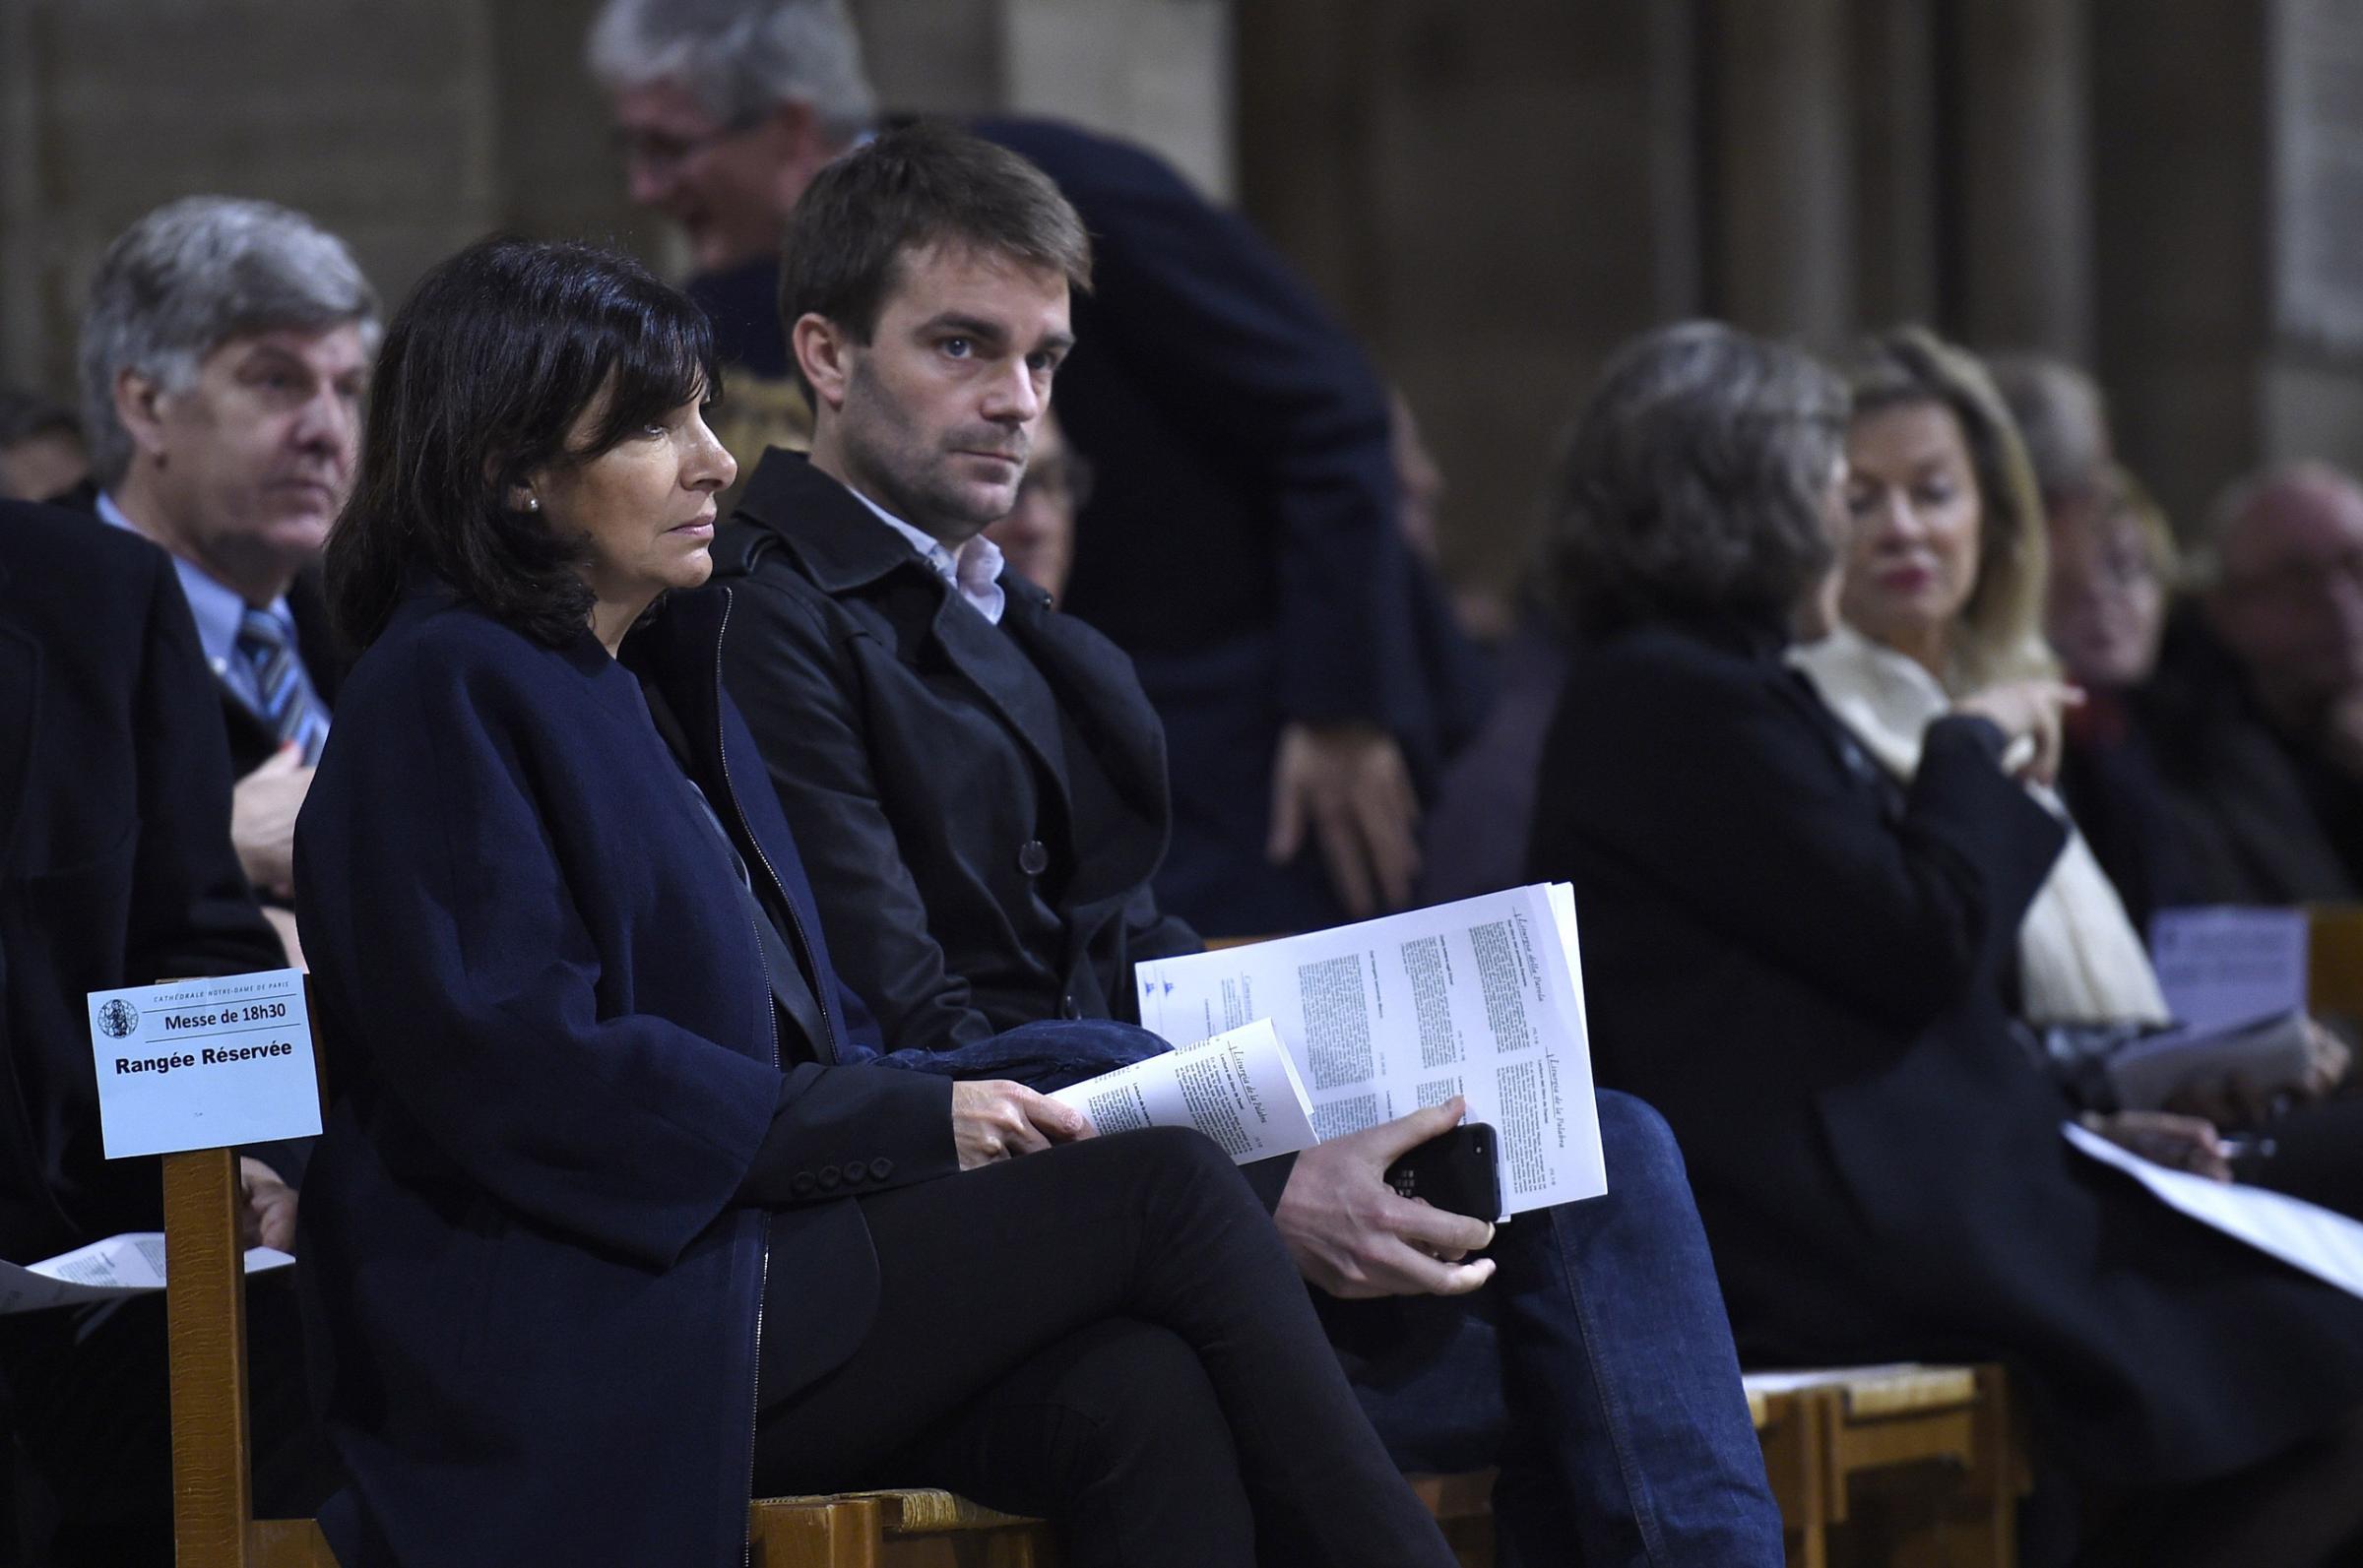 Paris mayor Anne Hidalgo (L) and Deputy-Mayor Bruno Julliard attend a mass service in homage to the attacks' victims at the Notre-Dame cathedral in Paris on November 15, 2015, two days after a series of deadly attacks. Islamic State jihadists claimed a series of coordinated attacks by gunmen and suicide bombers in Paris on November 13 that killed at least 129 people in scenes of carnage at a concert hall, restaurants and the national stadium. AFP PHOTO / LIONEL BONAVENTURELIONEL BONAVENTURE/AFP/Getty Images